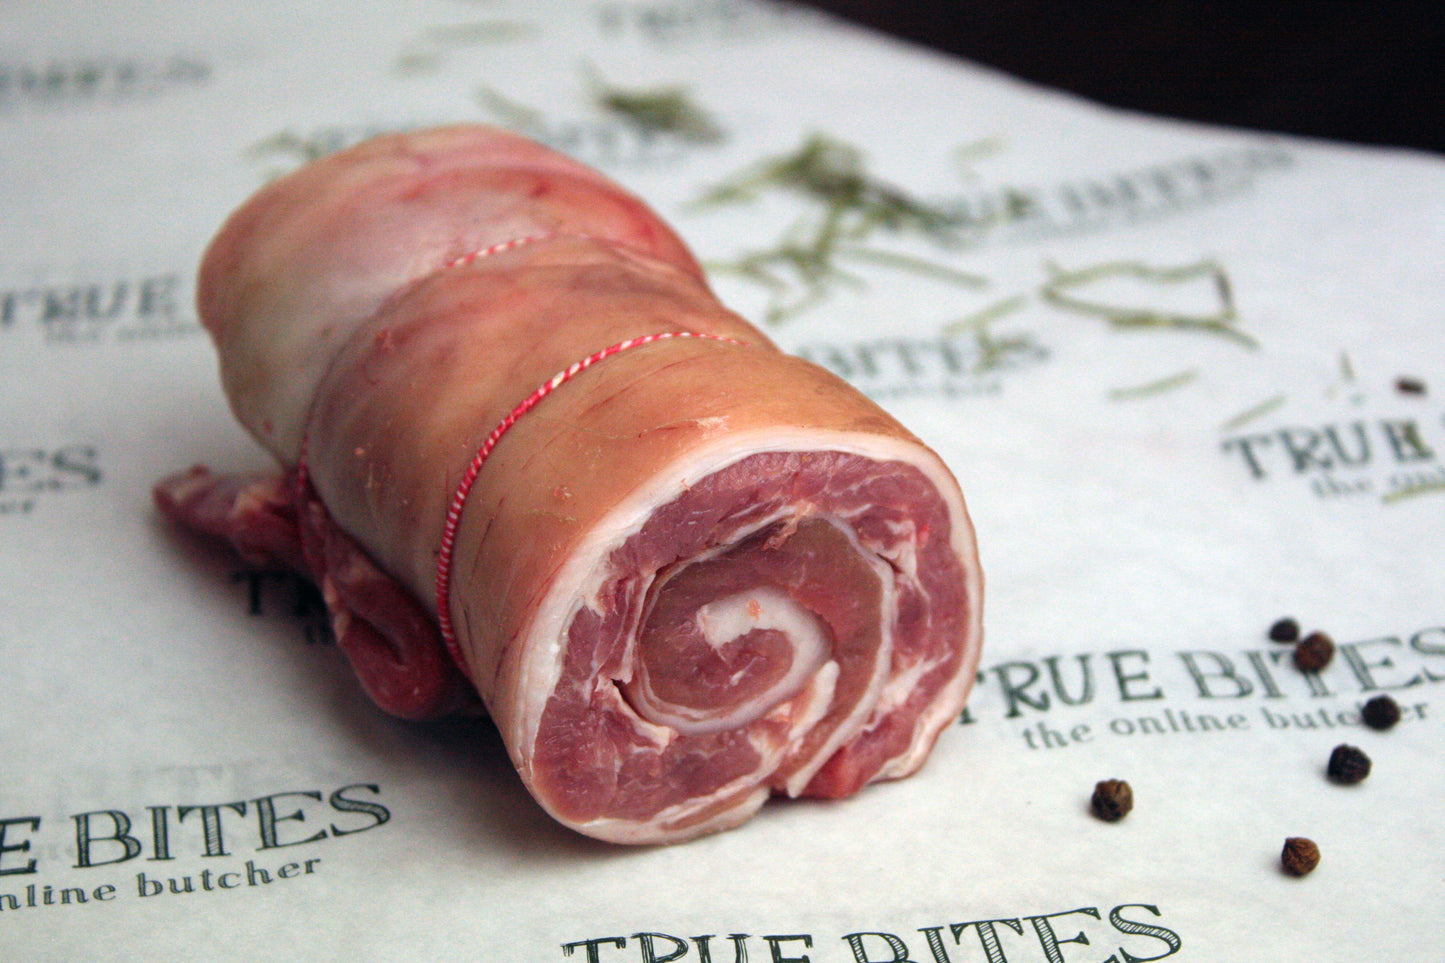 rolled lamb breast on true bites greaseproof paper